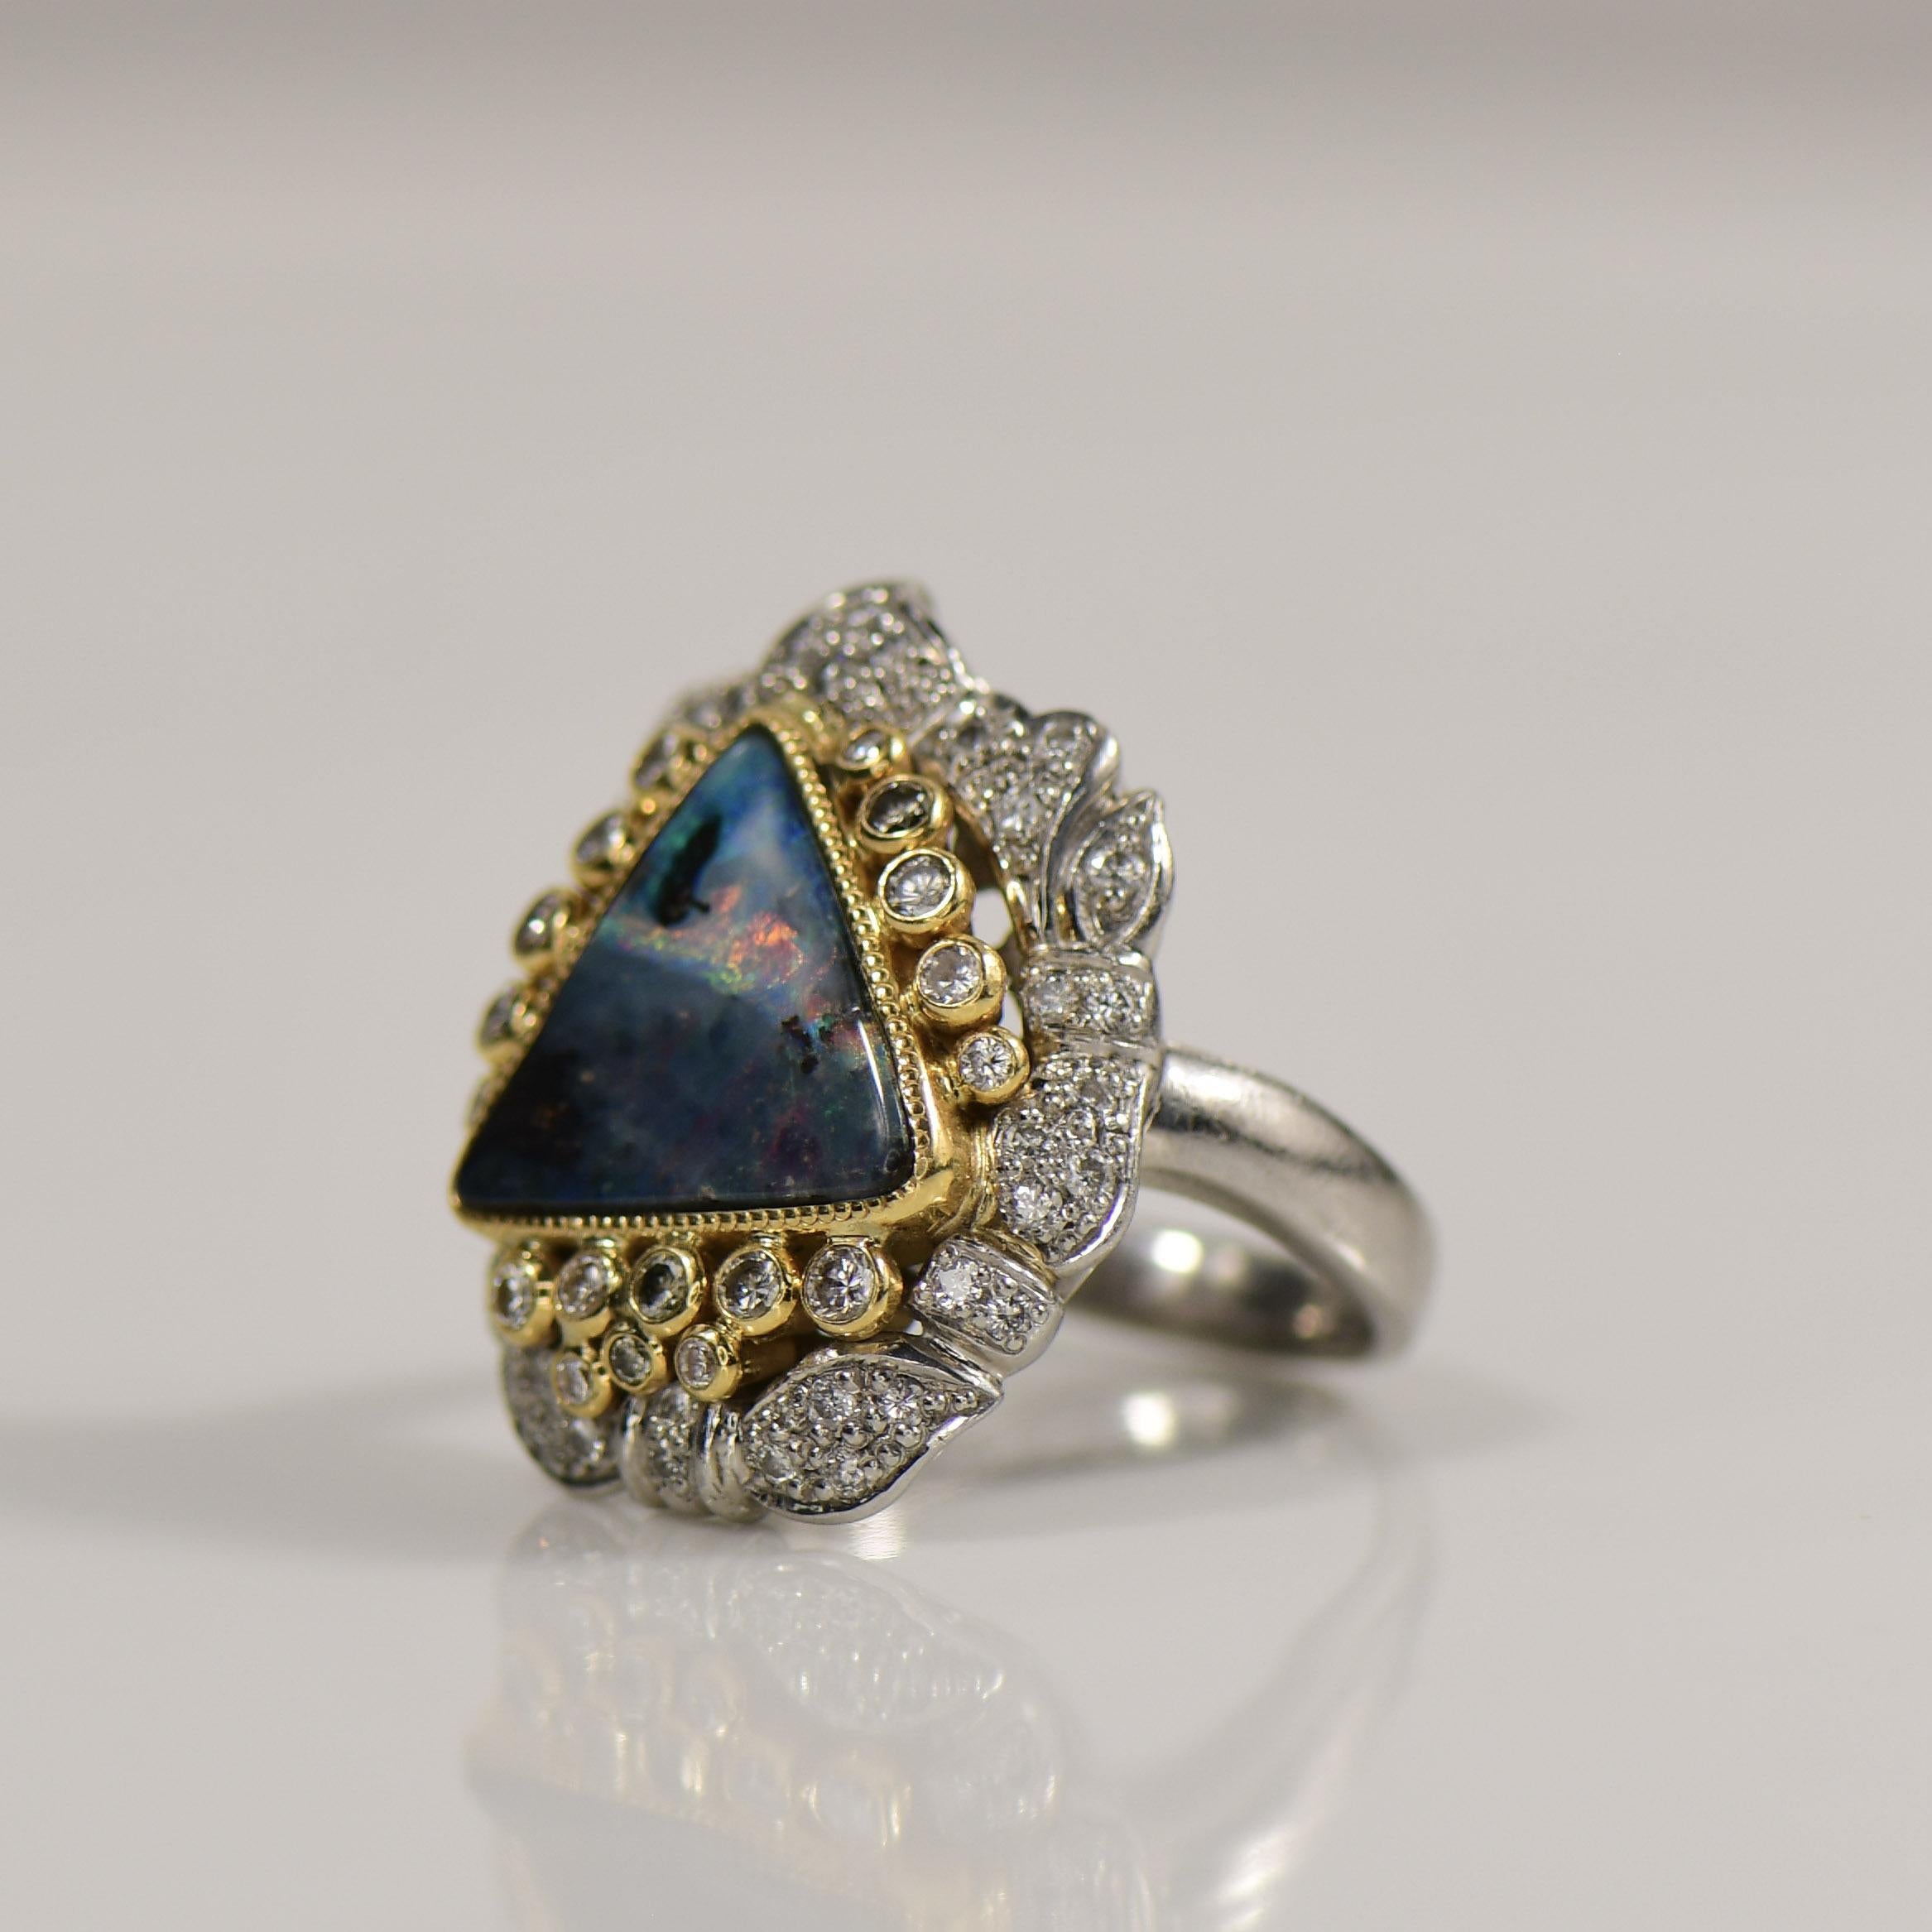 Brilliant Cut Platinum Boulder Opal and Diamond Ring with 18K Accent